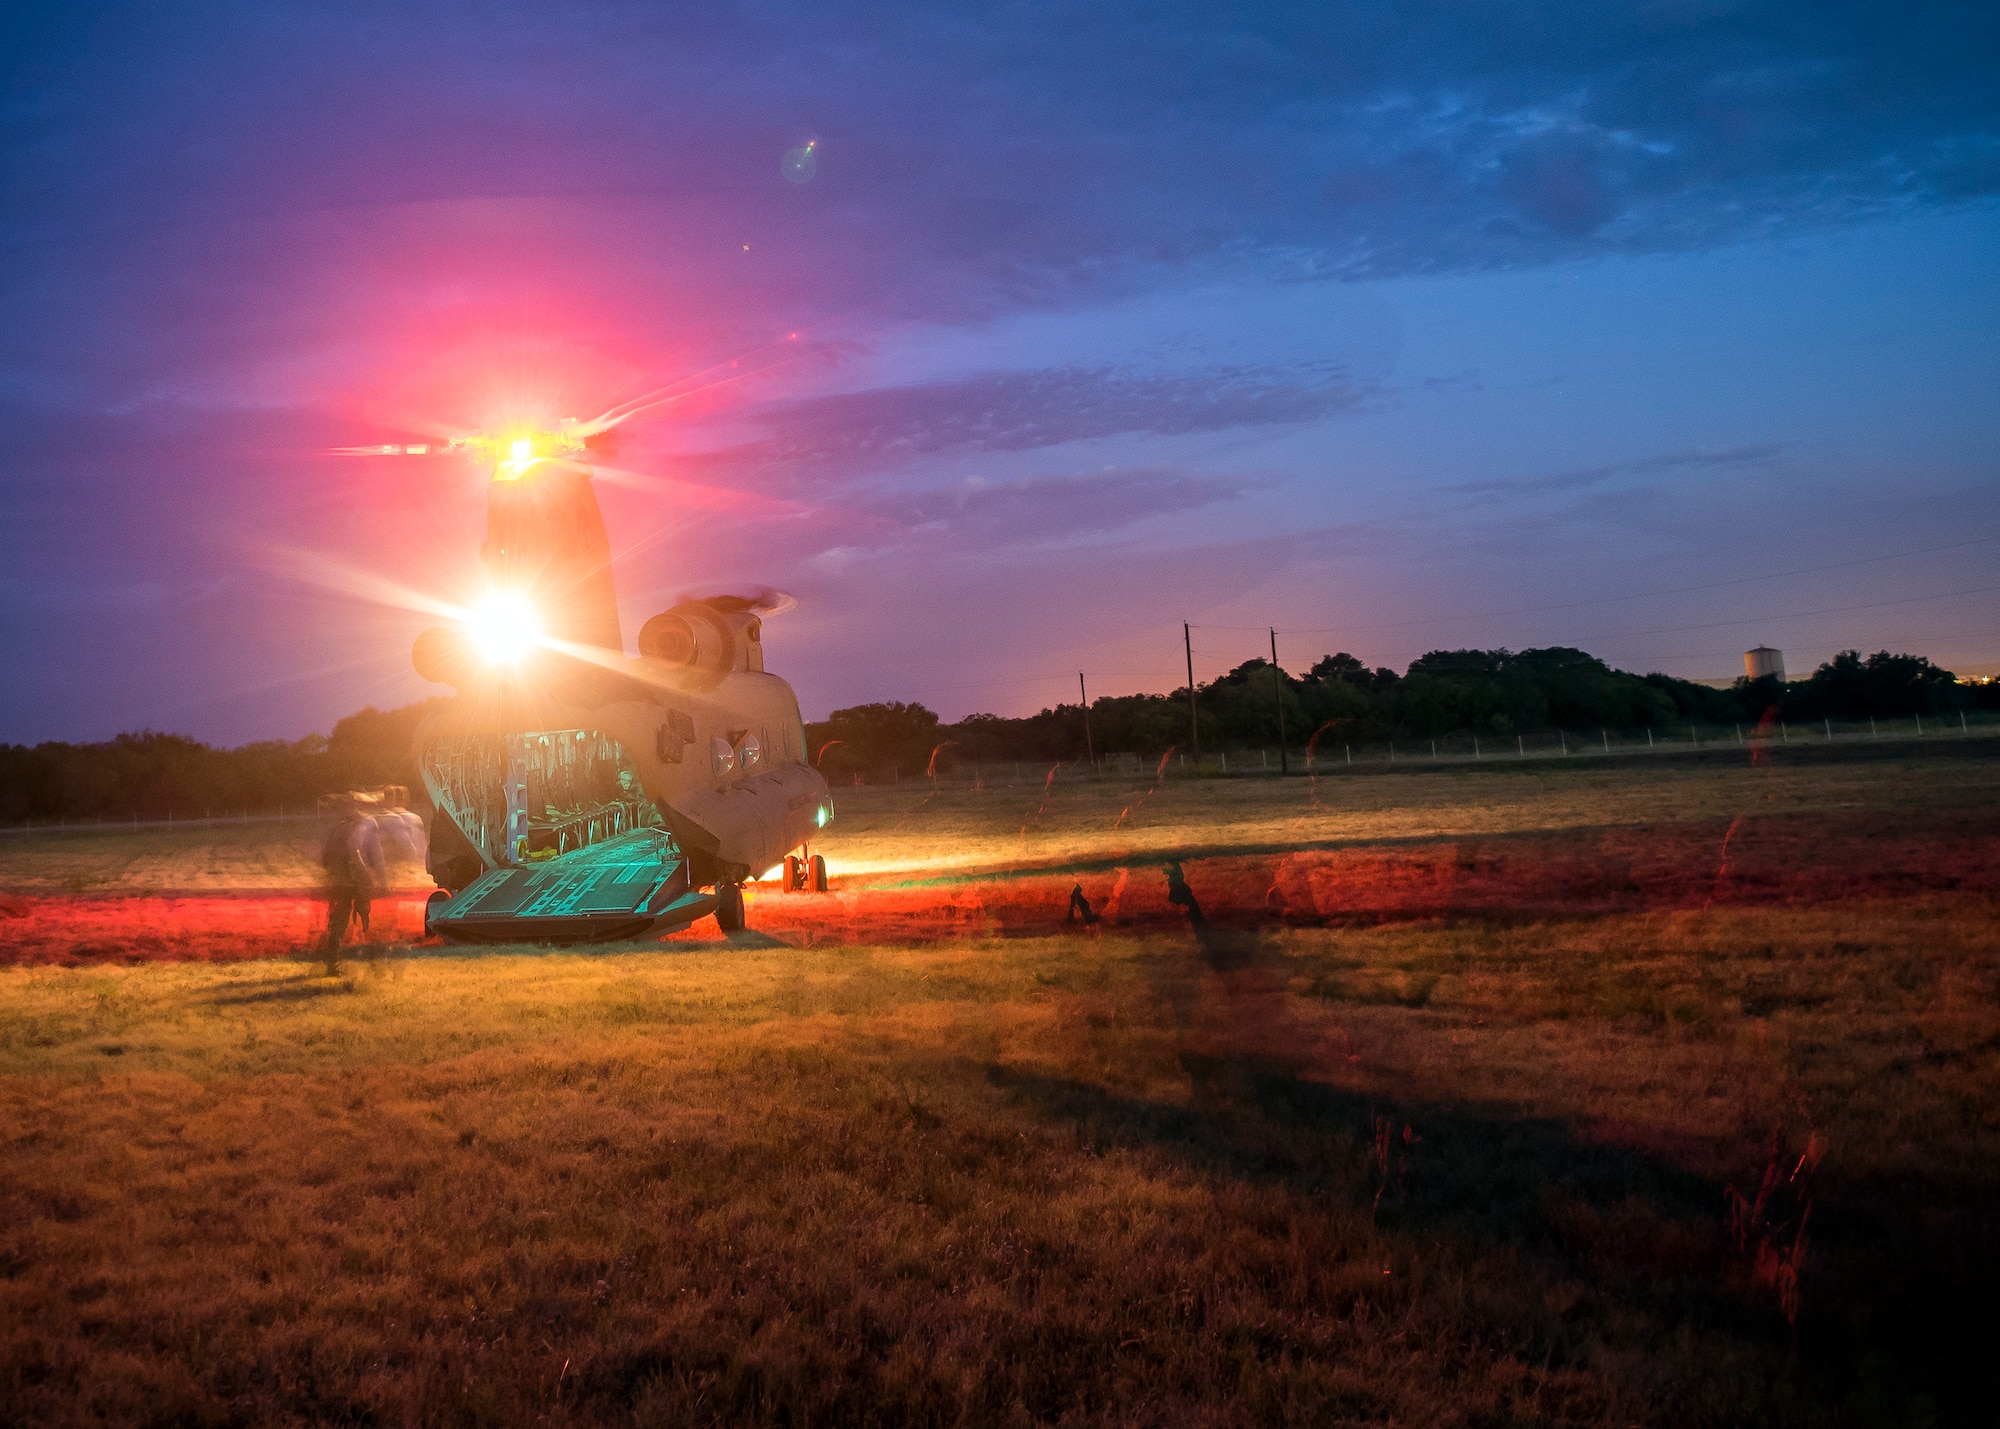 Staff Weather Officers (SWO) from the 3d Weather Squadron, depart a CH47-Chinook during a certification field exercise (CFX), July 29, 2019, at Camp Bowie Training Center, Texas.  The CFX was designed to evaluate the squadron’s overall tactical ability and readiness to provide the U.S. Army with full spectrum environmental support to the Joint Task Force (JTF) fight. (U.S. Air Force photo by Airman 1st Class Eugene Oliver)